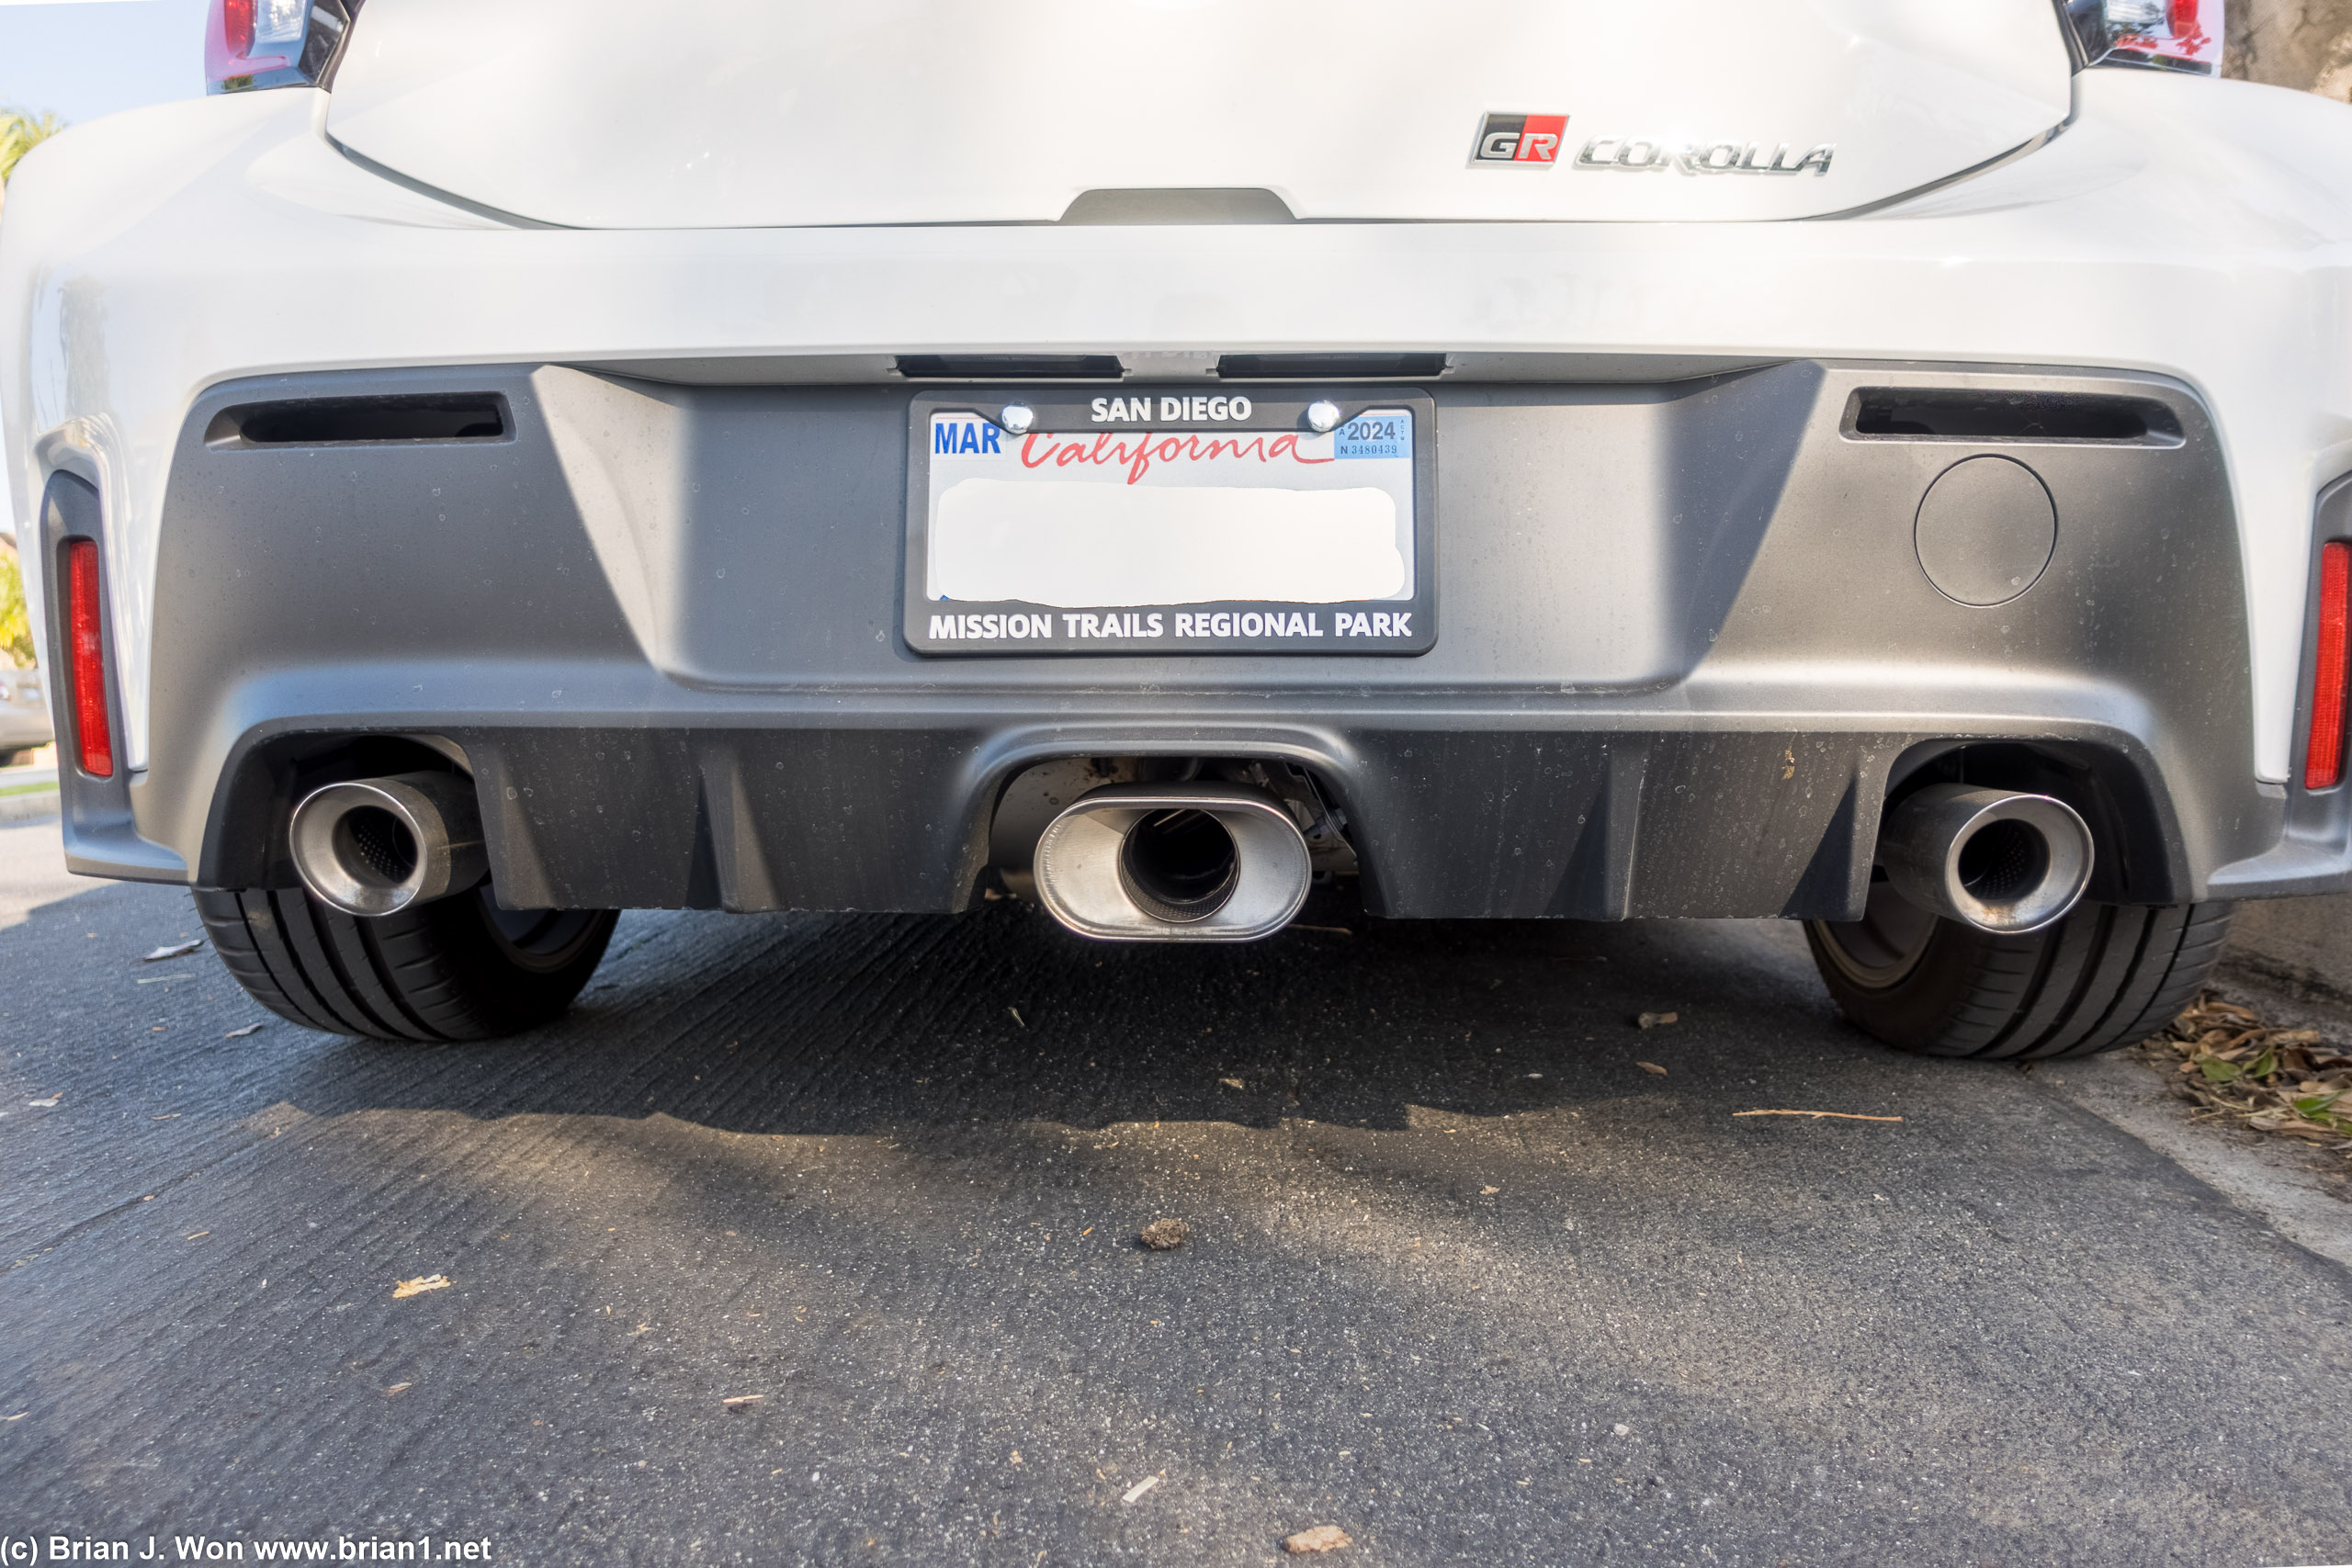 Triple exit stock exhaust is actually kind of loud.